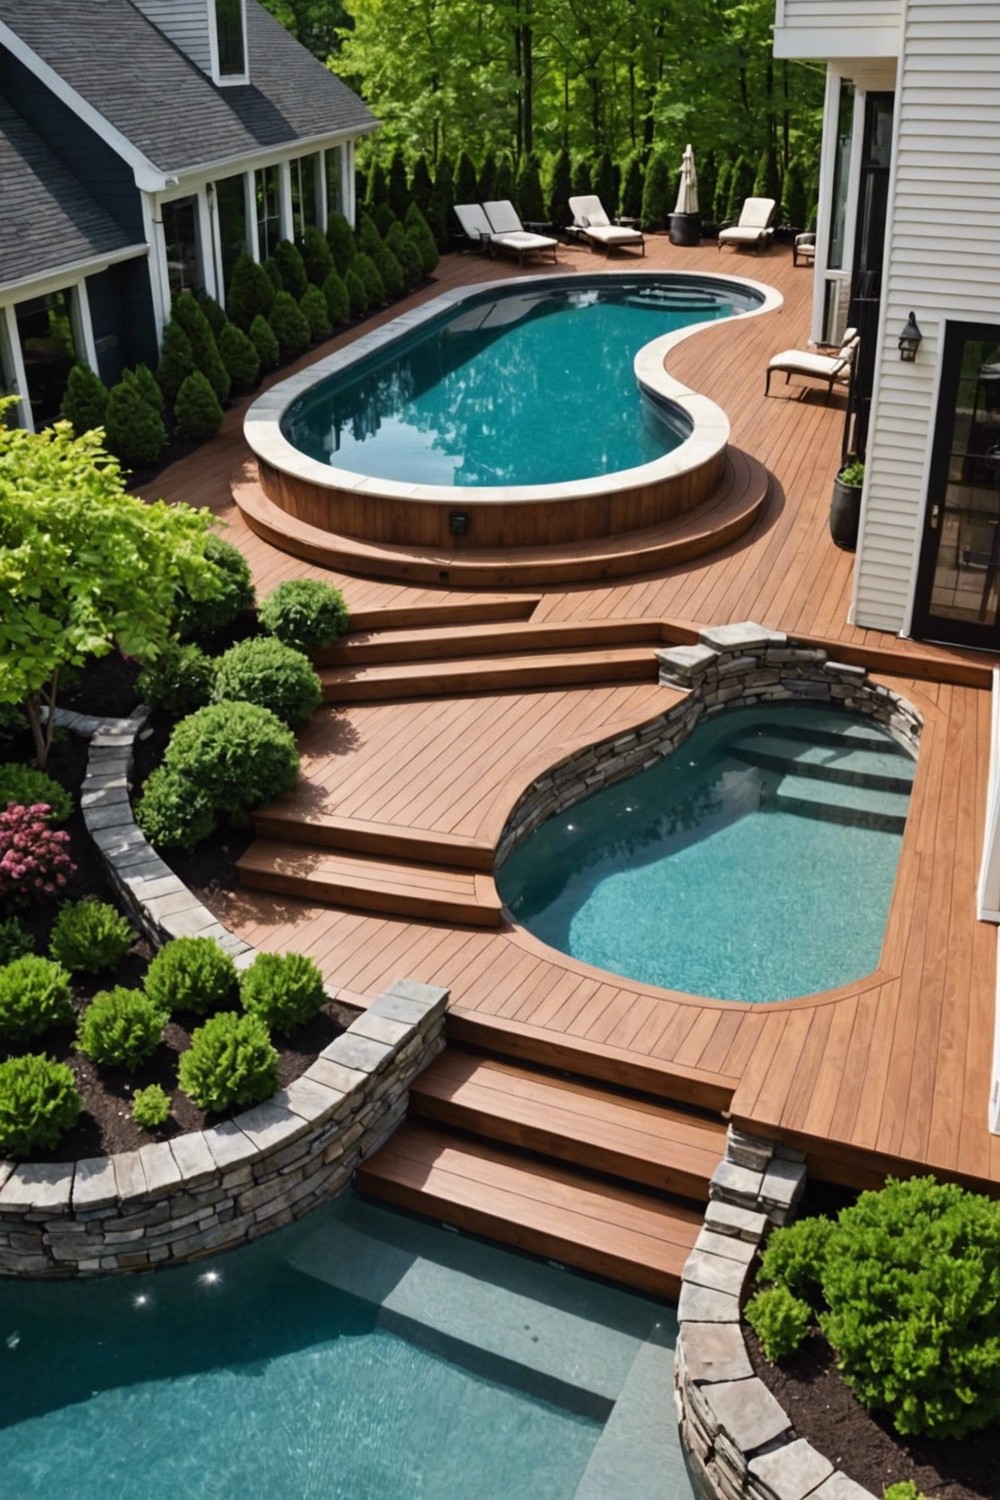 Wider Steps for Small Decks with a Grand Feel